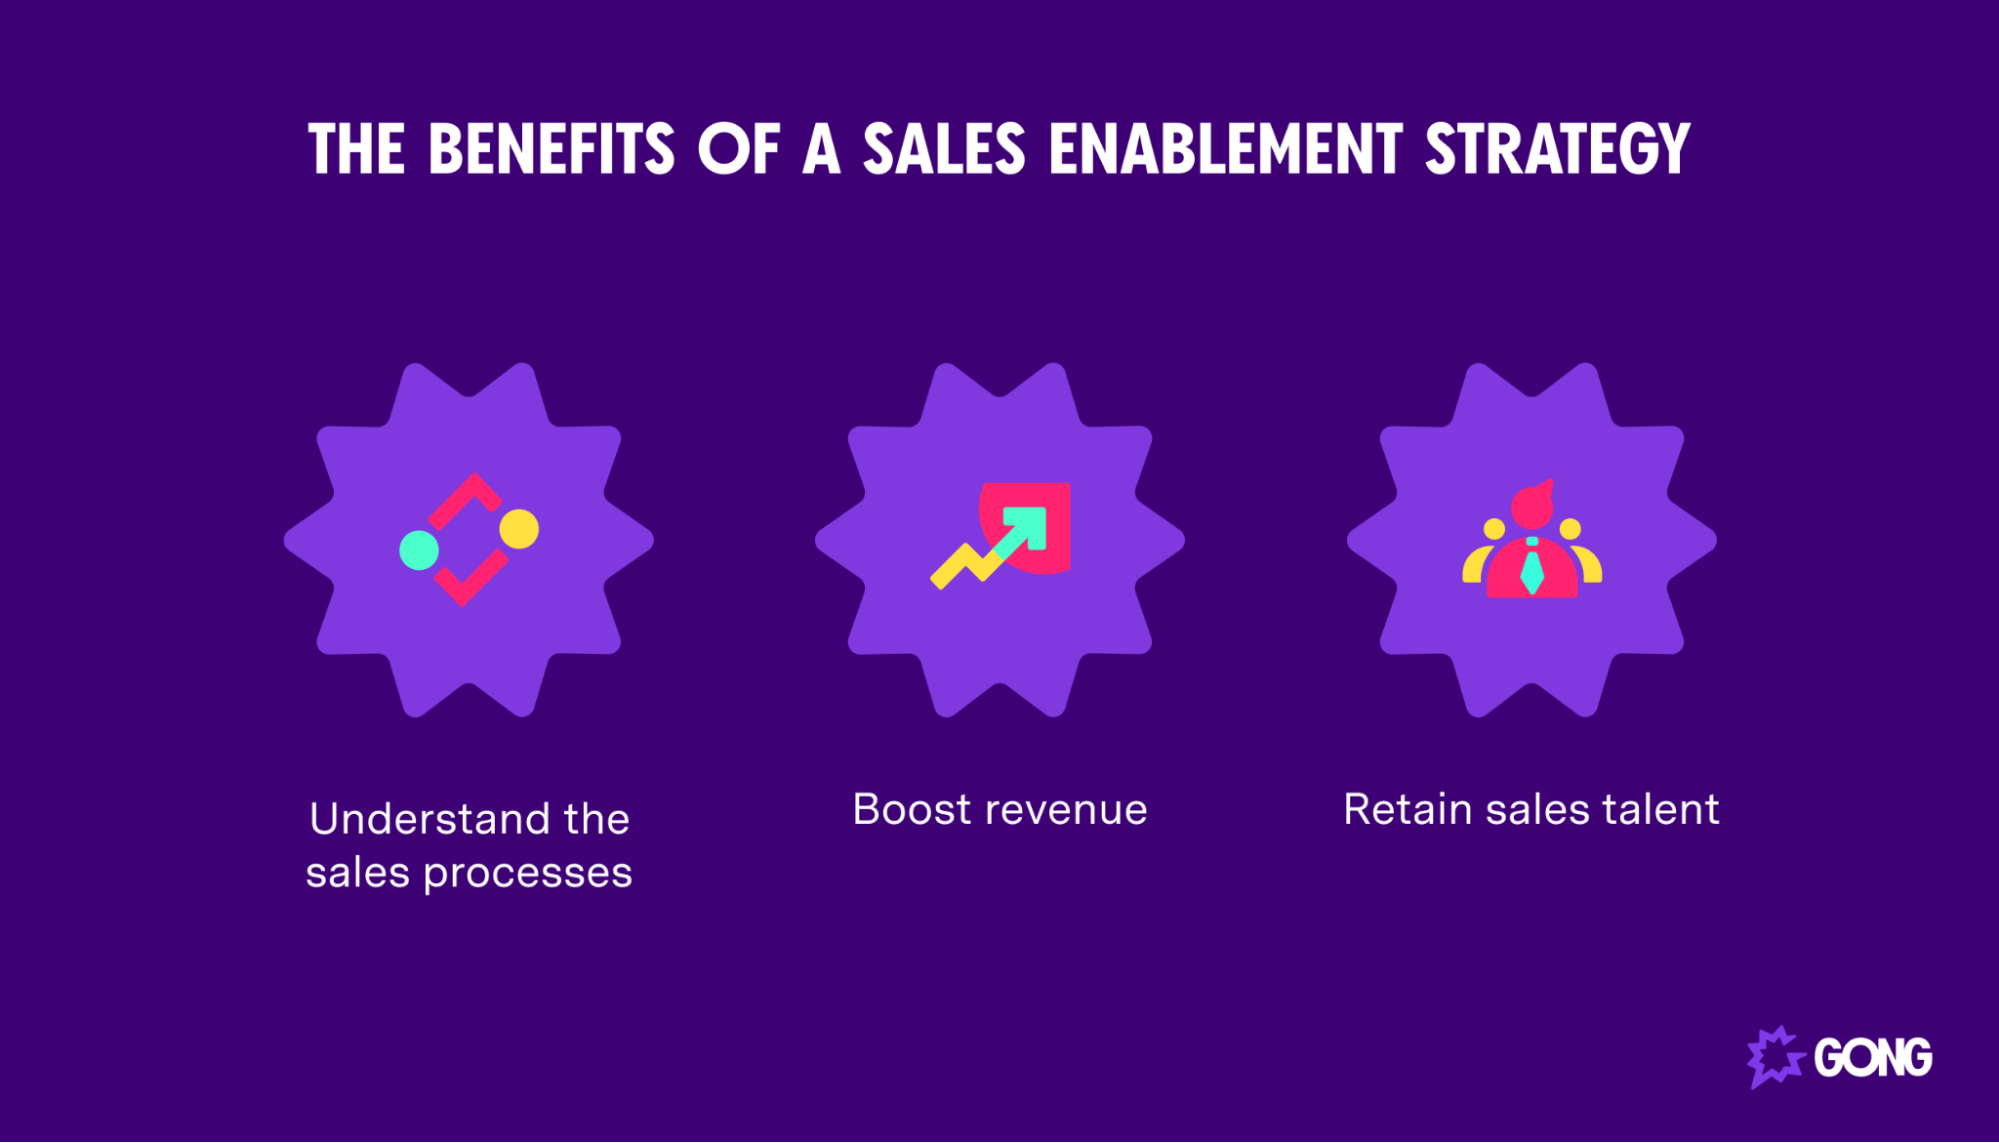 What are the benefits of a sales enablement strategy